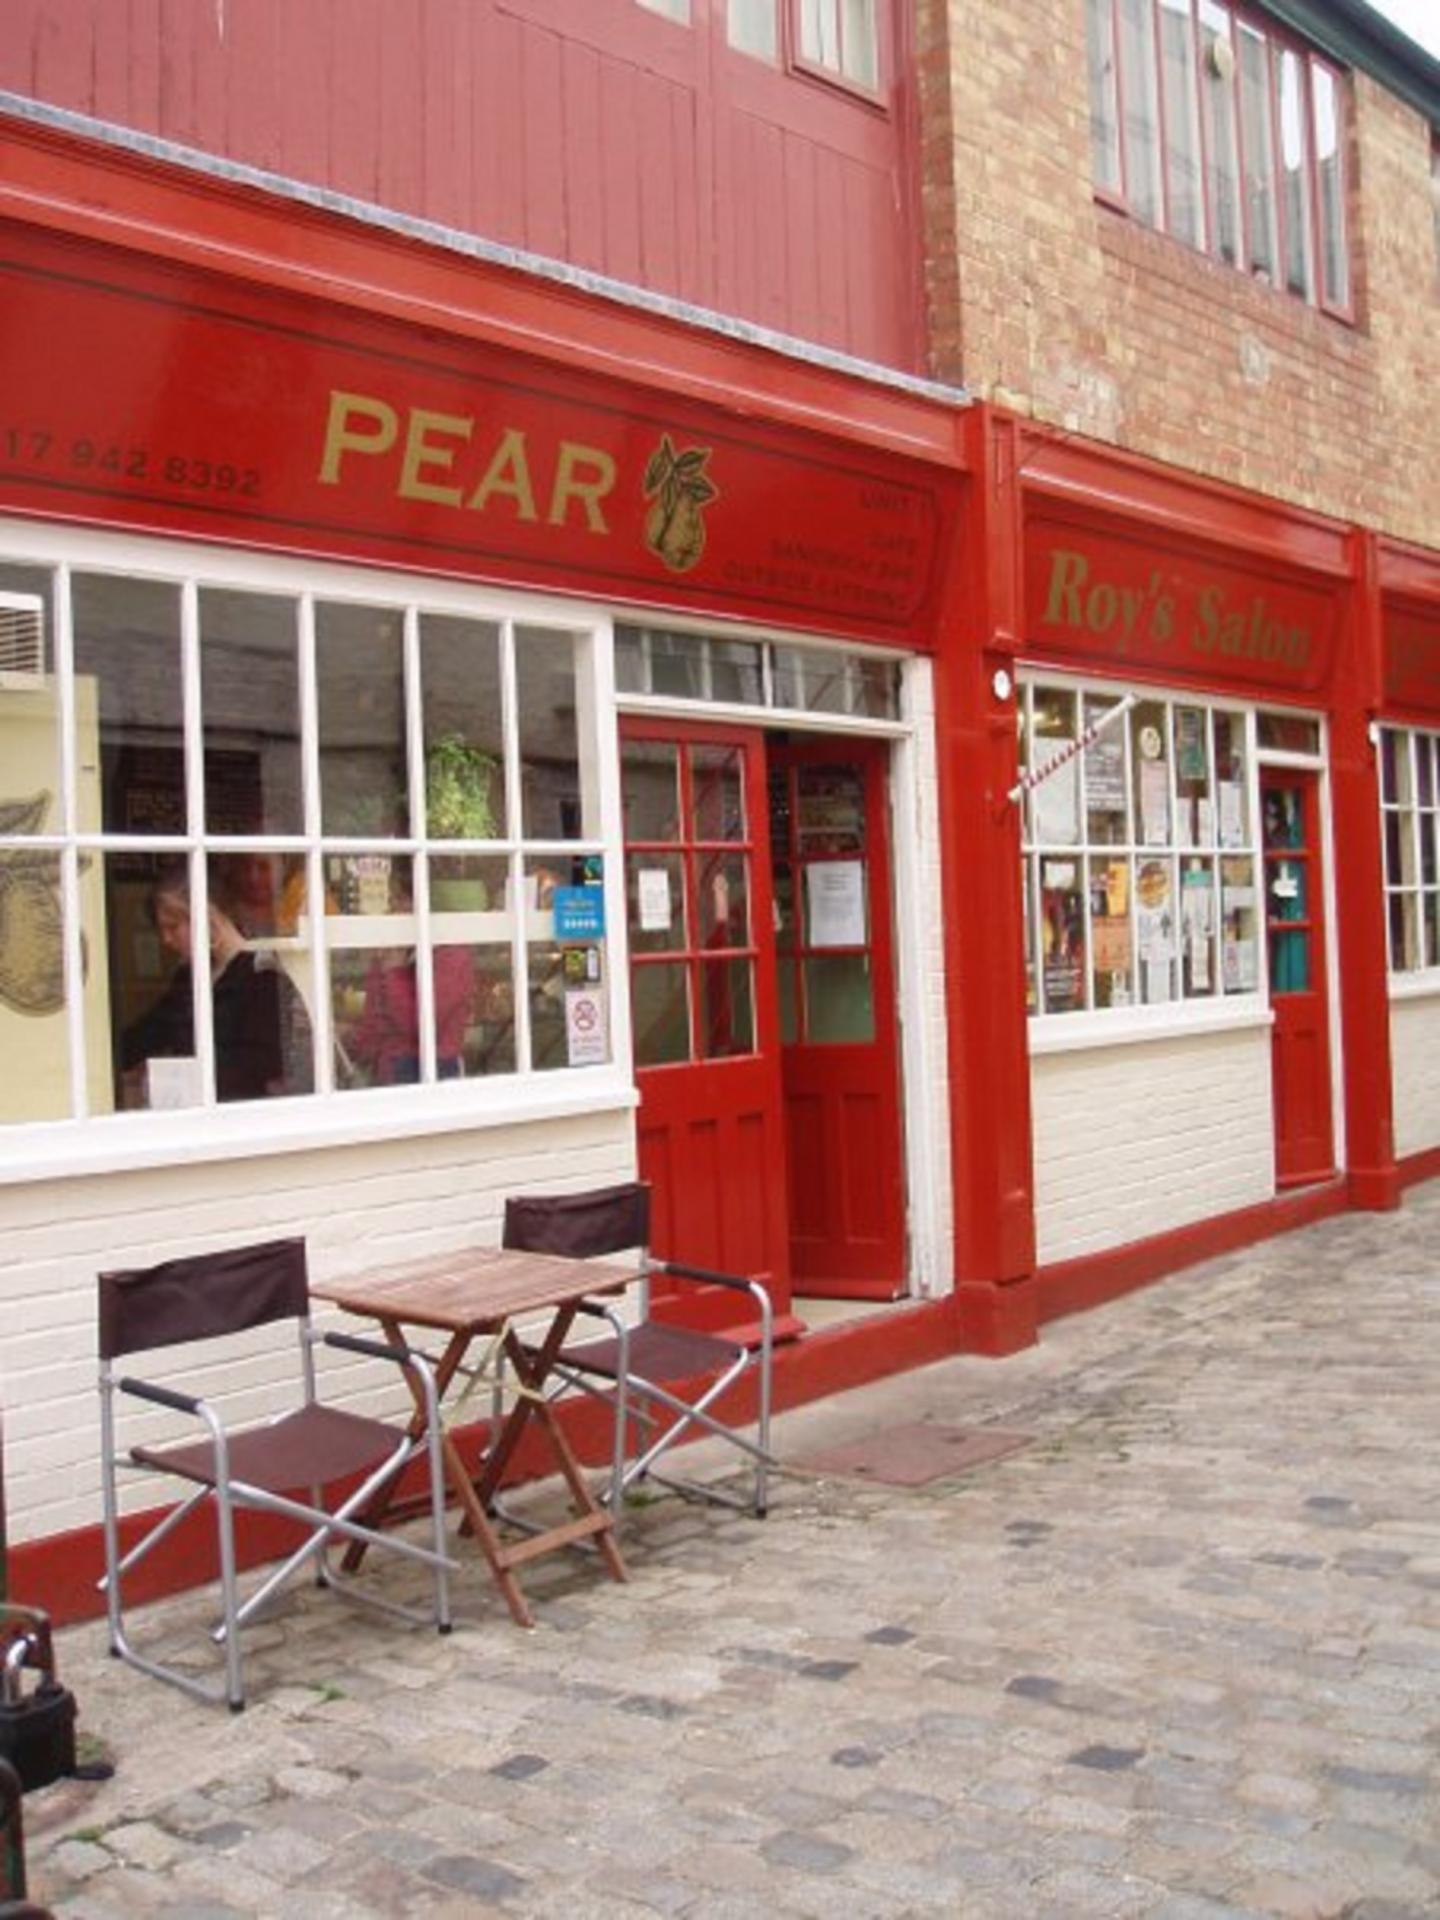 The Pear Cafe